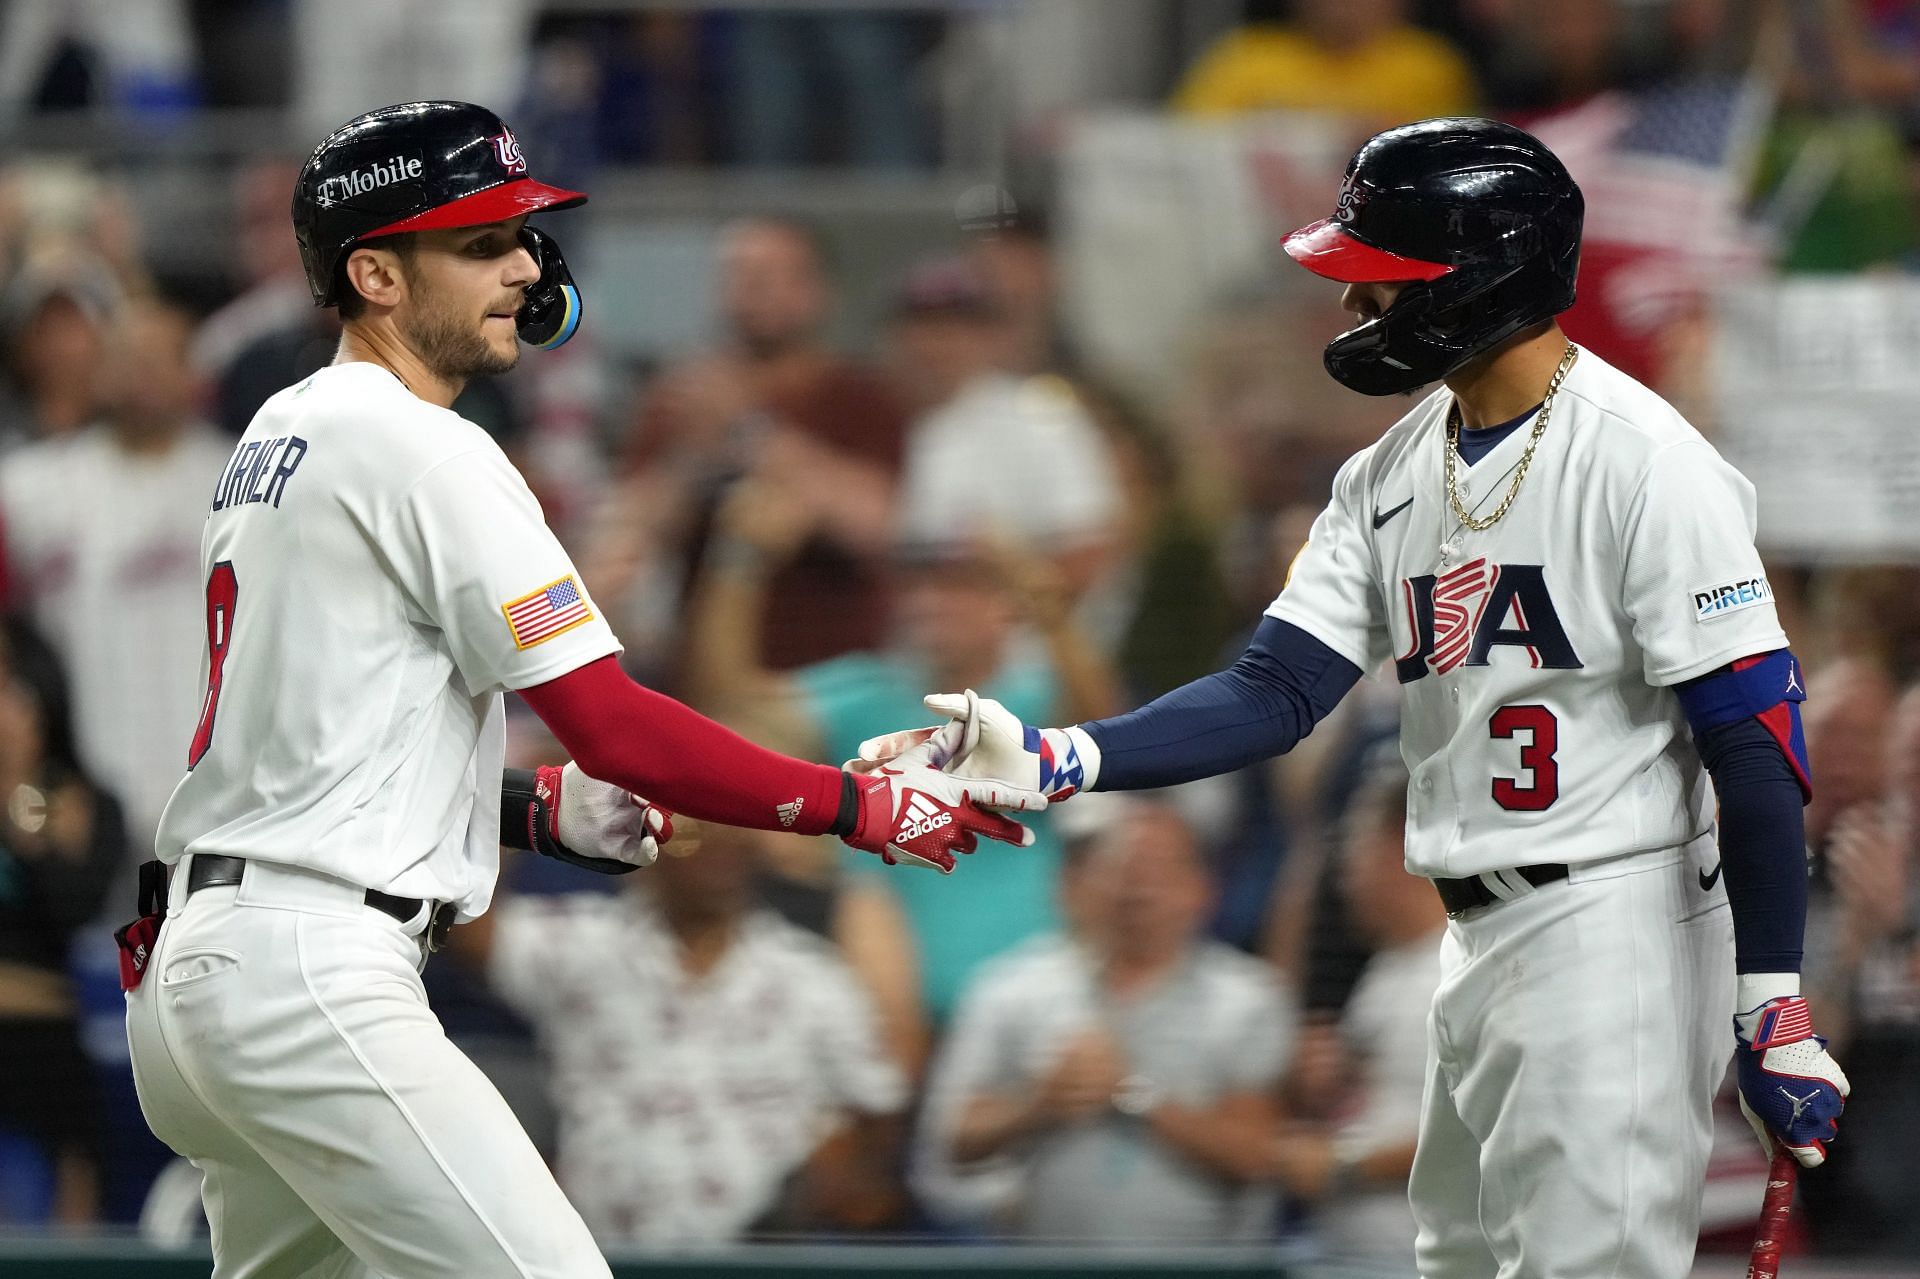 Trea Turner #8 of Team USA shakes hands with Mookie Betts #3 after hitting a solo home run in the second inning against Team Cuba